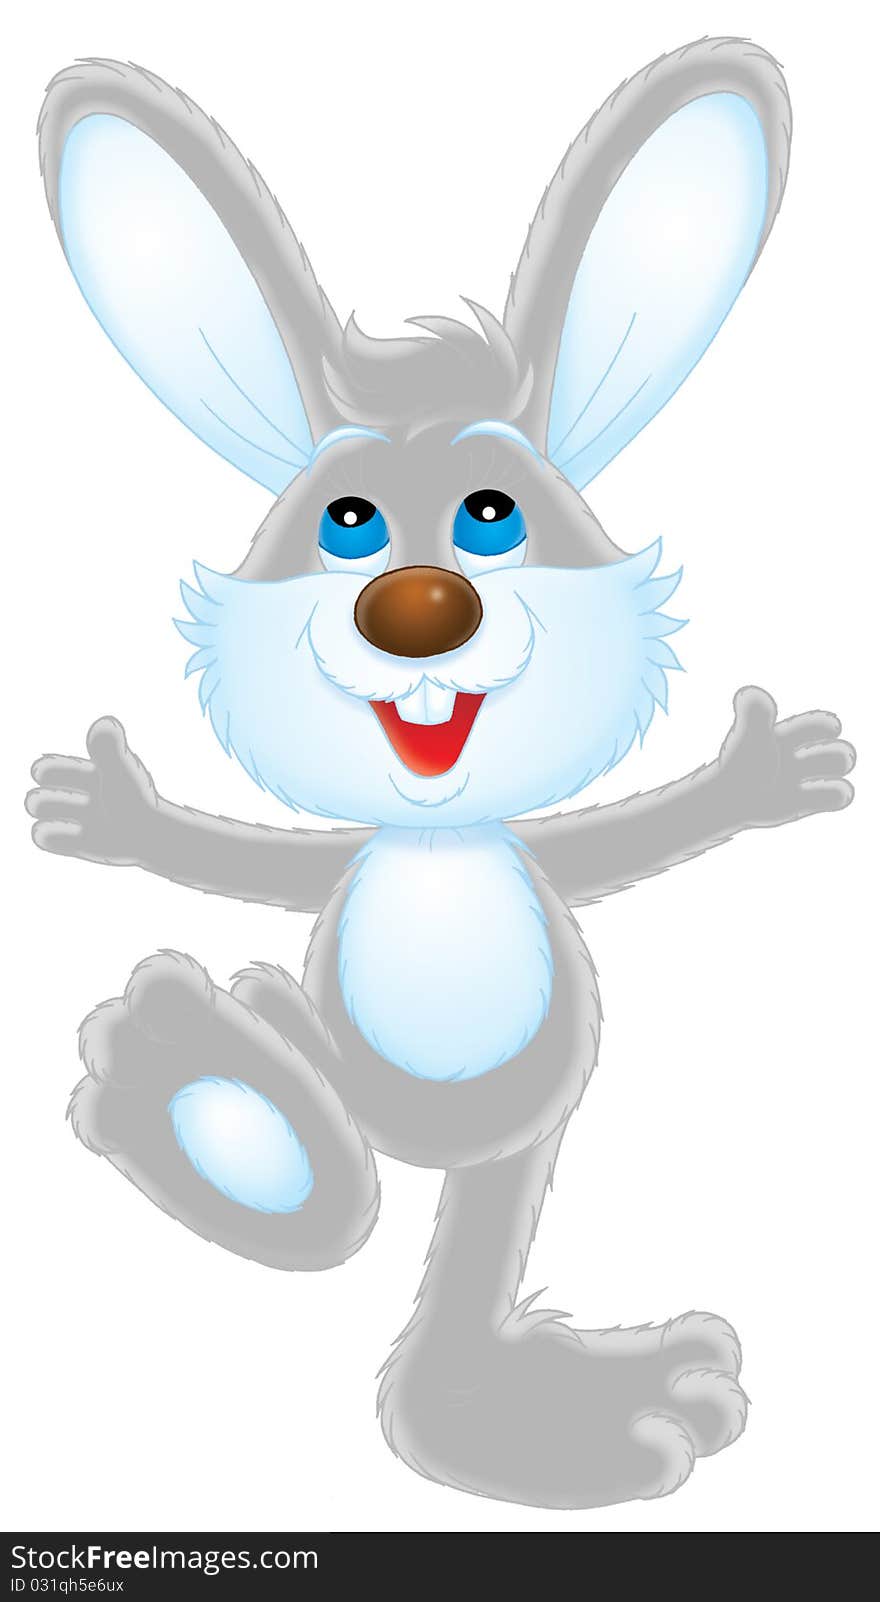 Isolated clip art of a grey rabbit